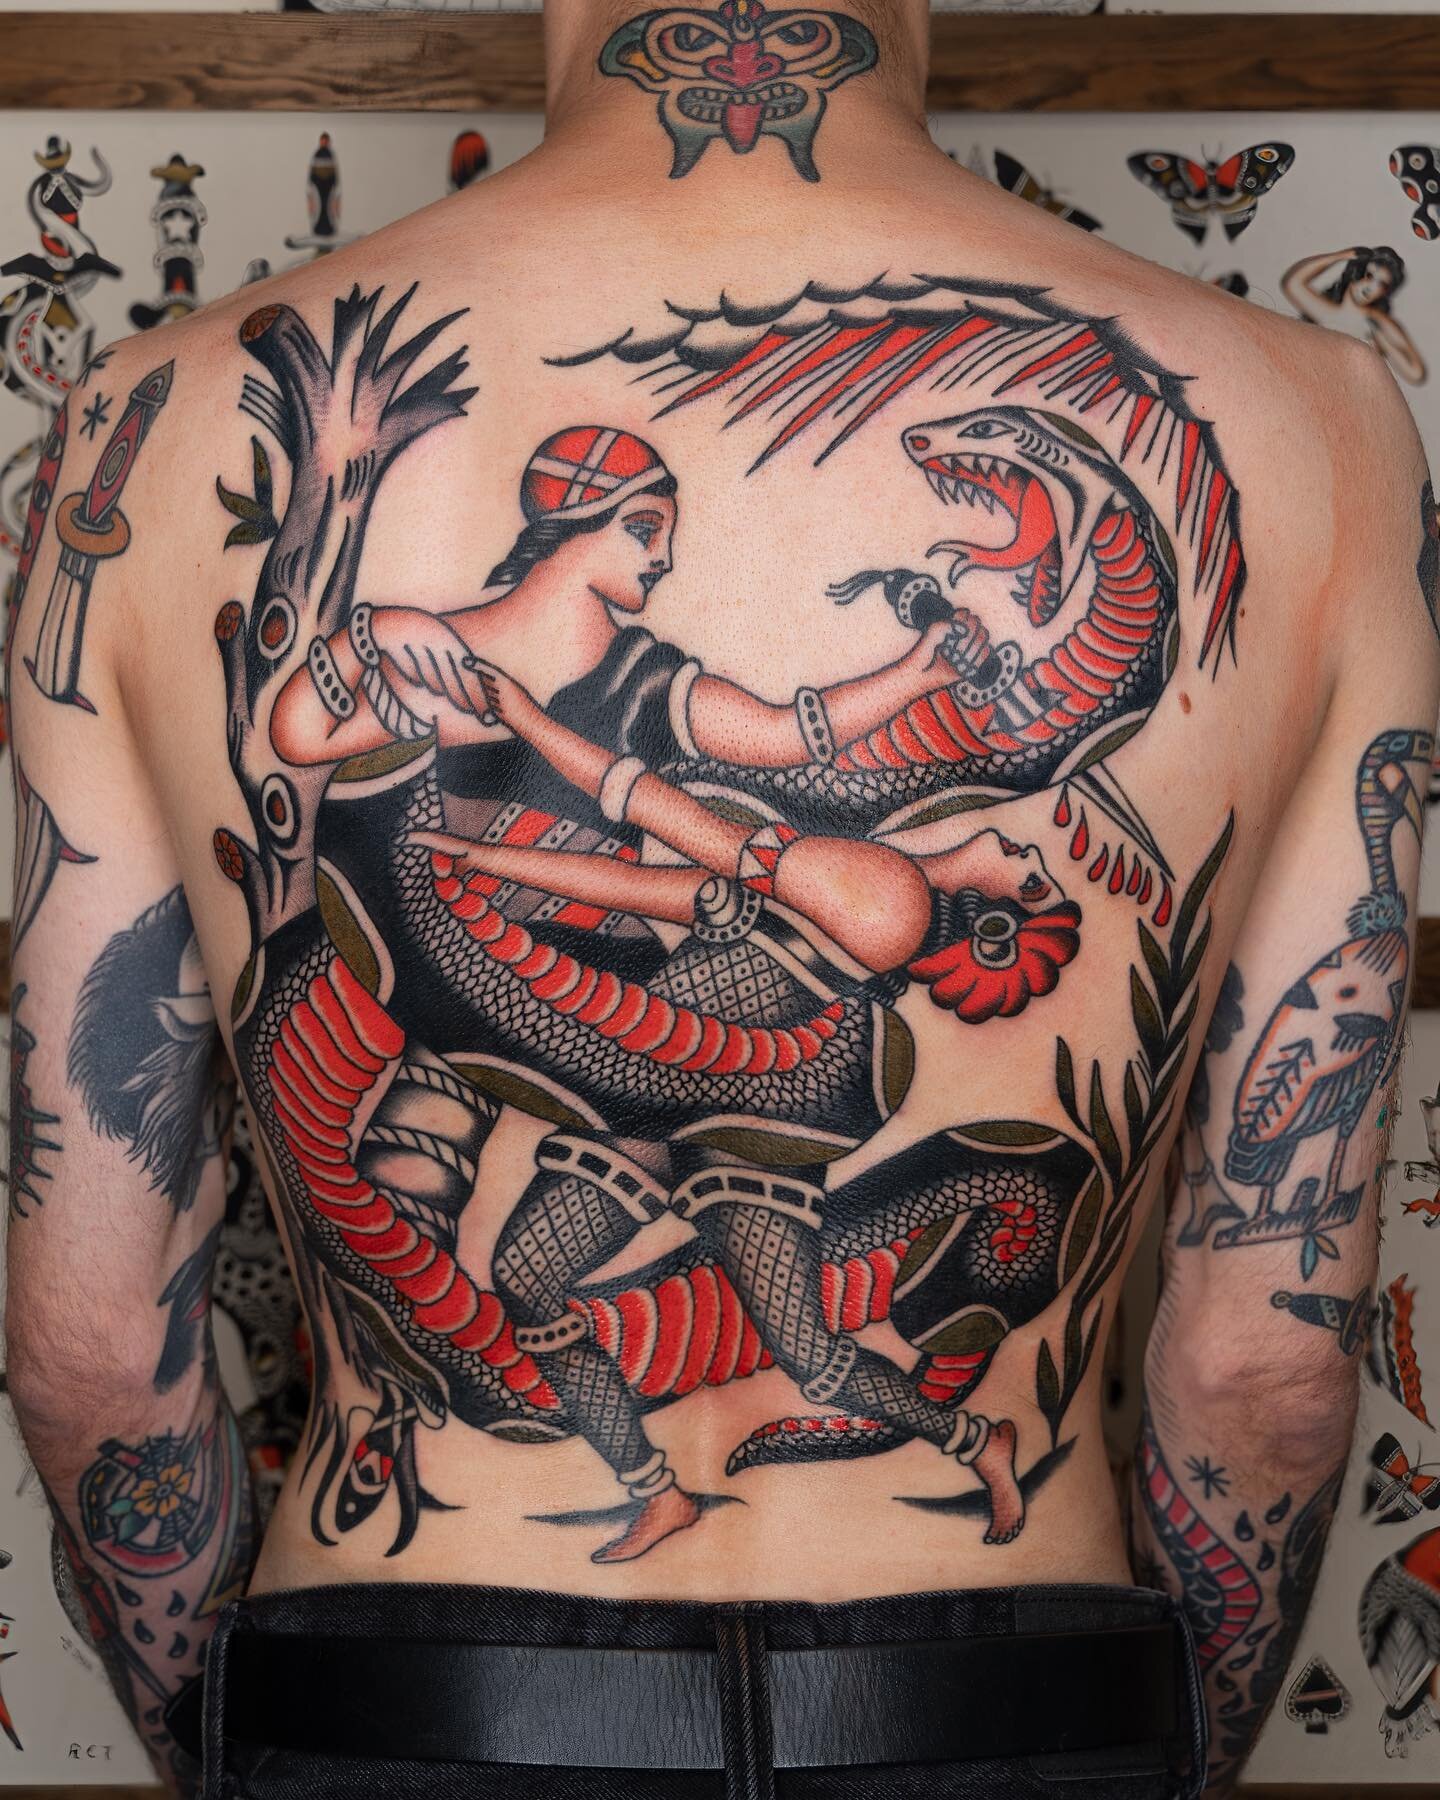 You can also visit Portland and get your back tattooed.